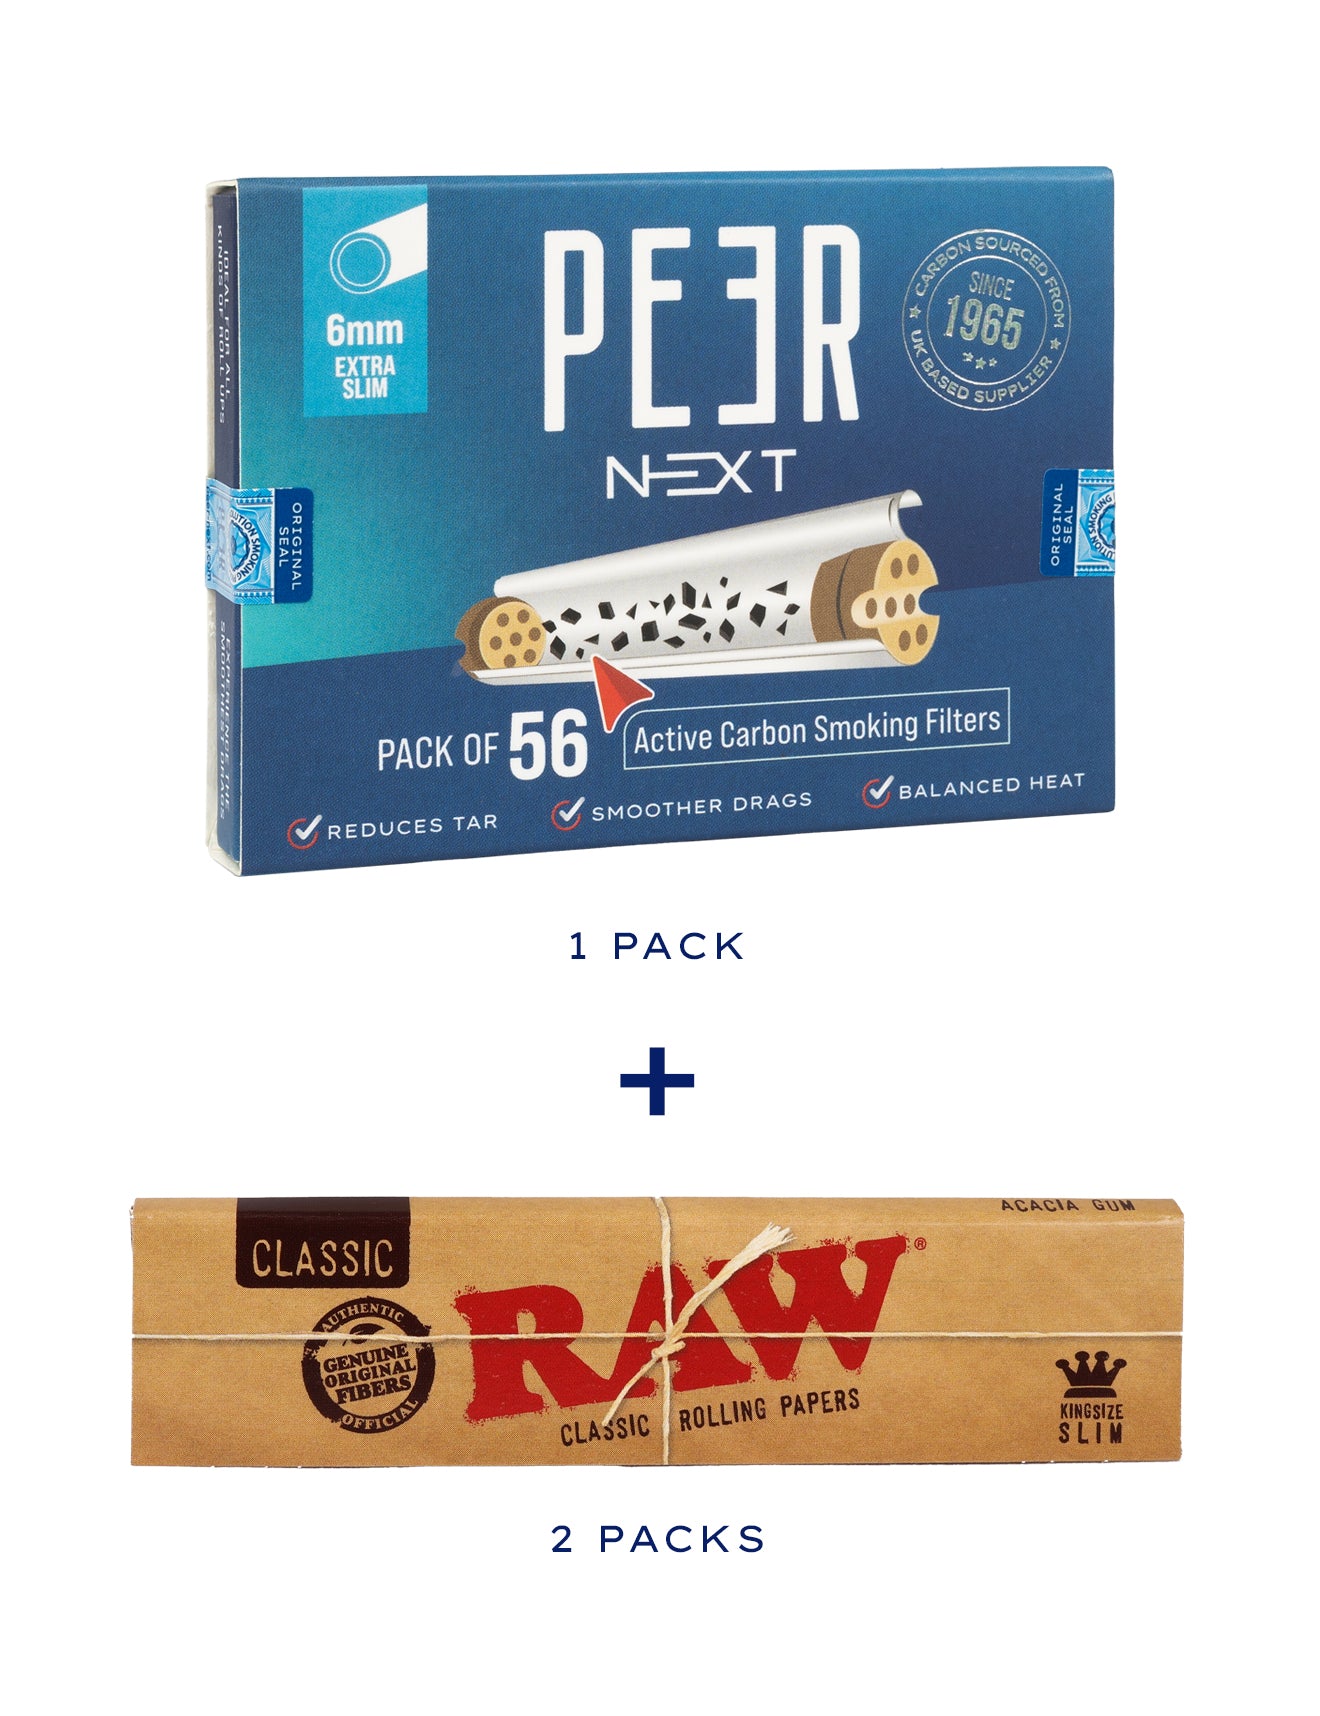 PEER Next combo pack of active carbon smoking filters and Raw Brown Classic rolling paper